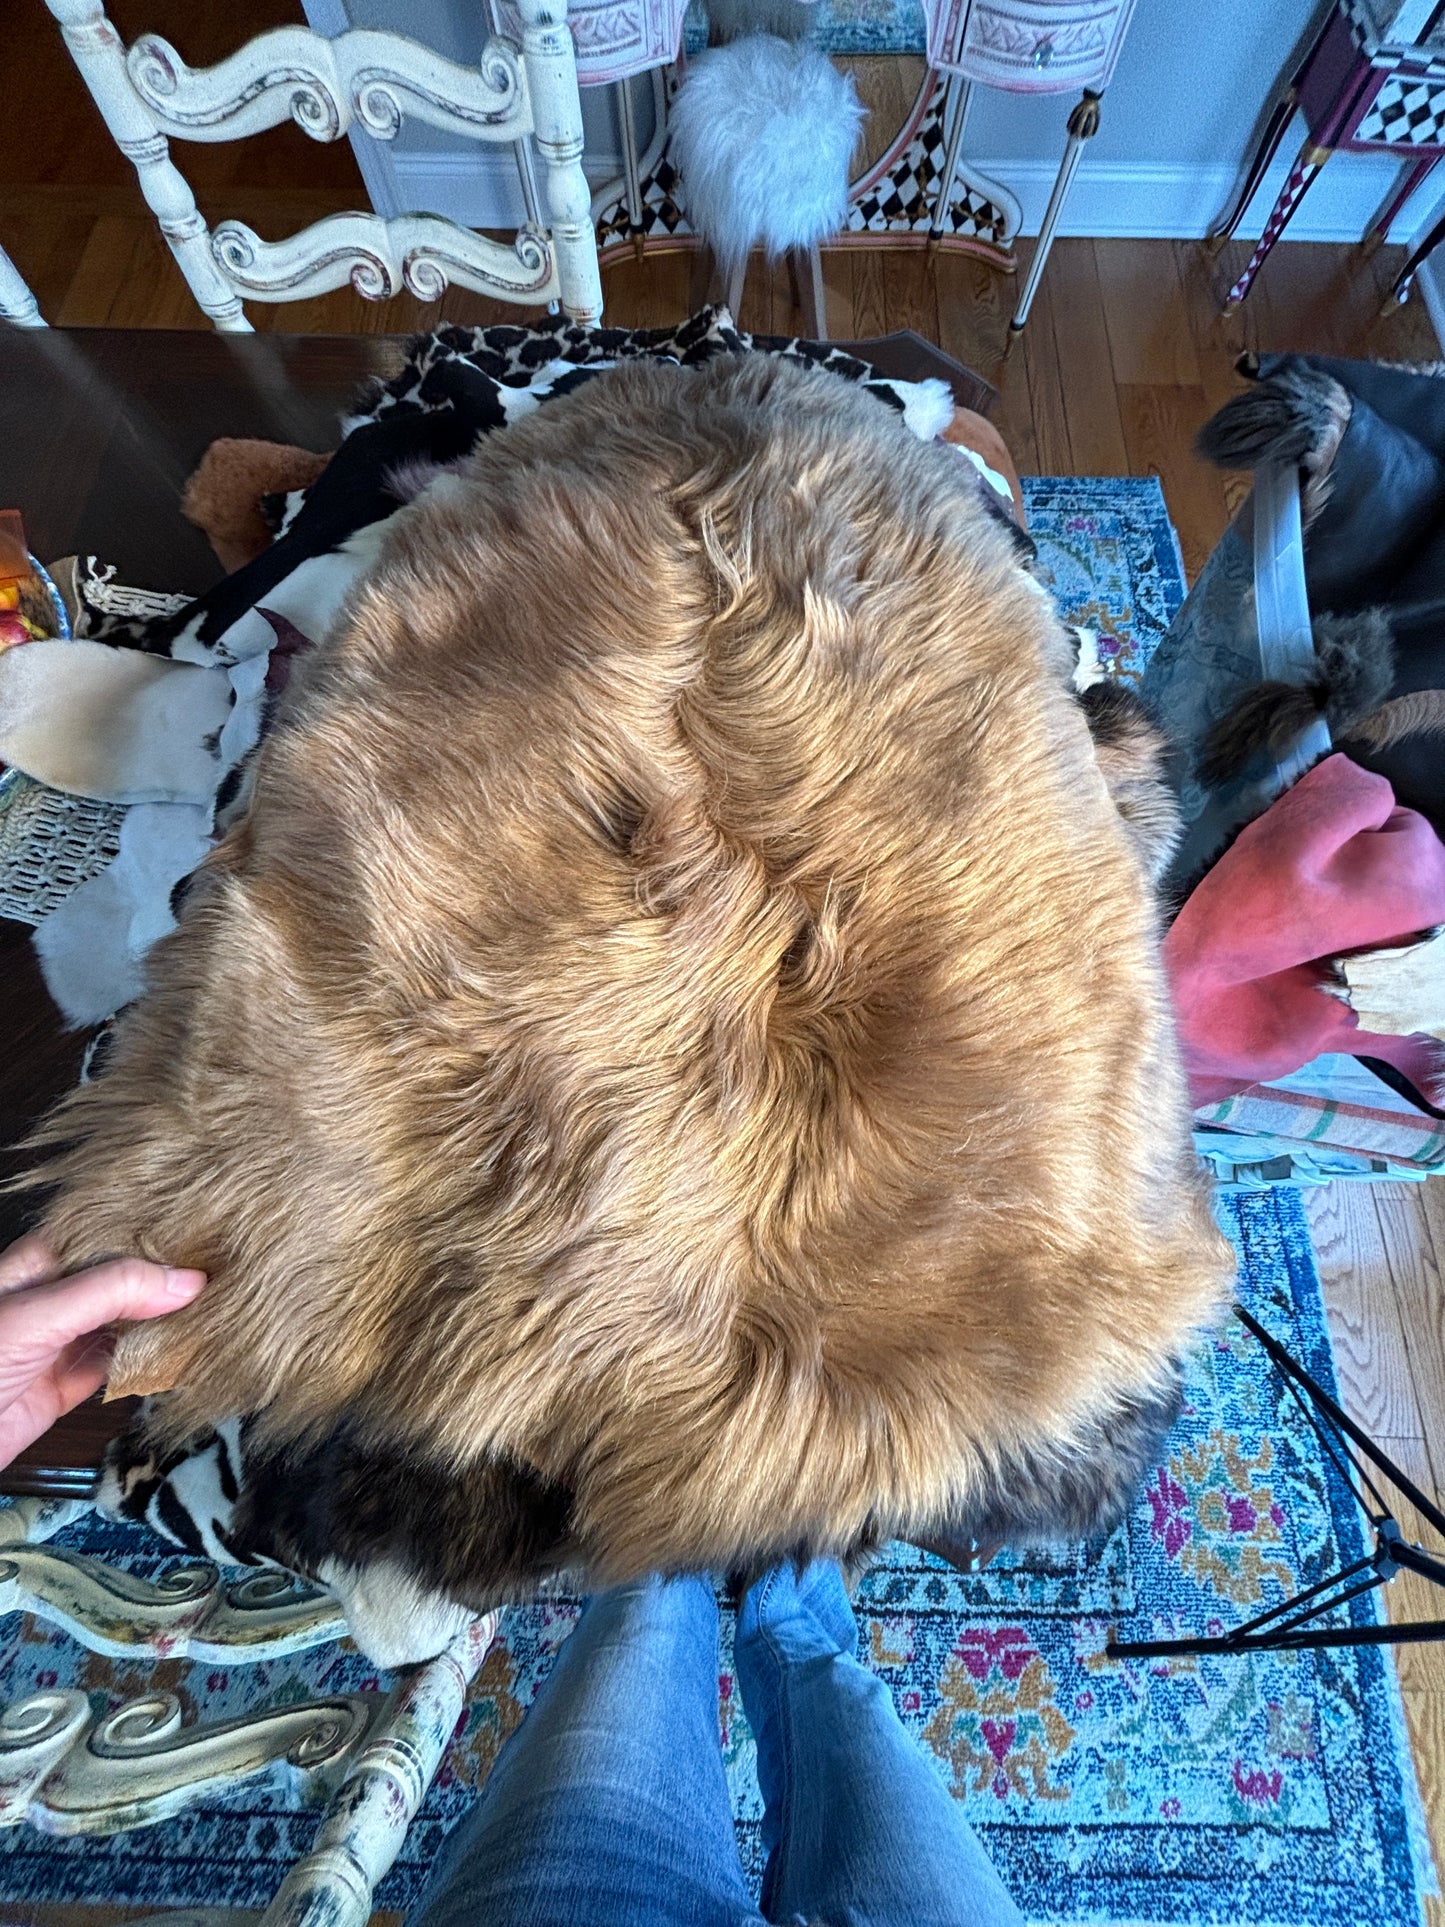 Listing 2 Shearling Merino Sheep Pelt, Sheepskin, Upholstery, Woolly, Leather Suede, Upcycling, DIY Projects, Choose Color, Genuine Hide Fur